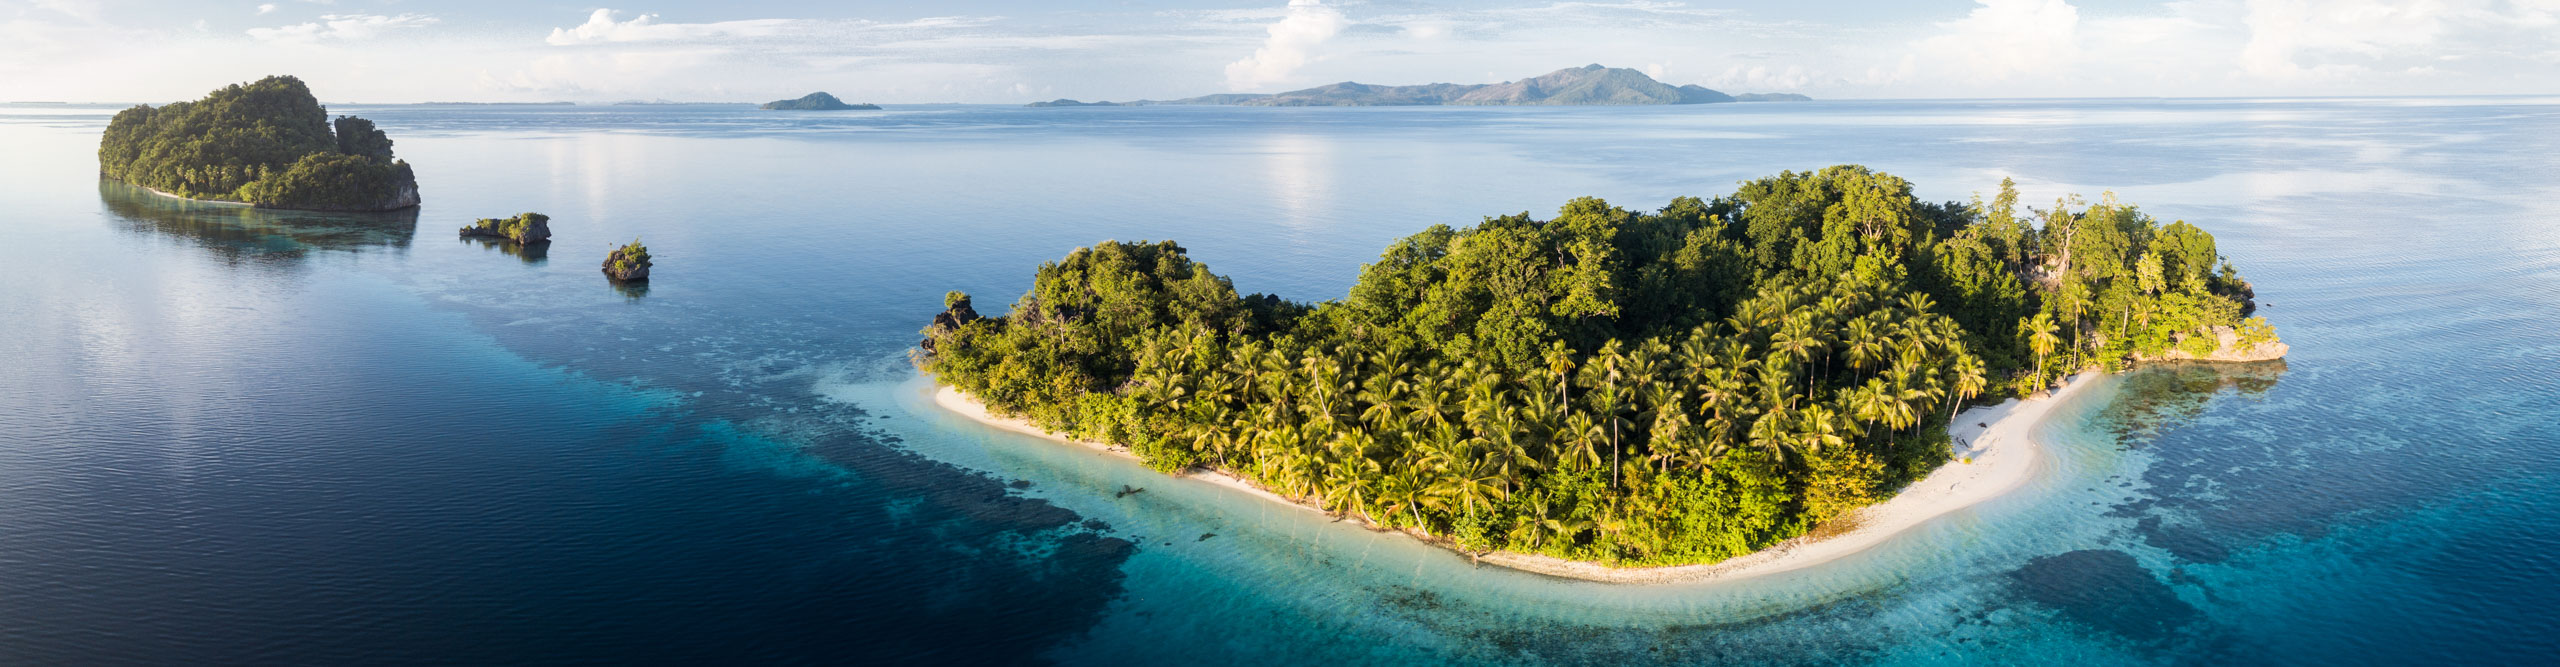 The islands found throughout Raja Ampat, Indonesia, are surrounded by flourishing coral reefs